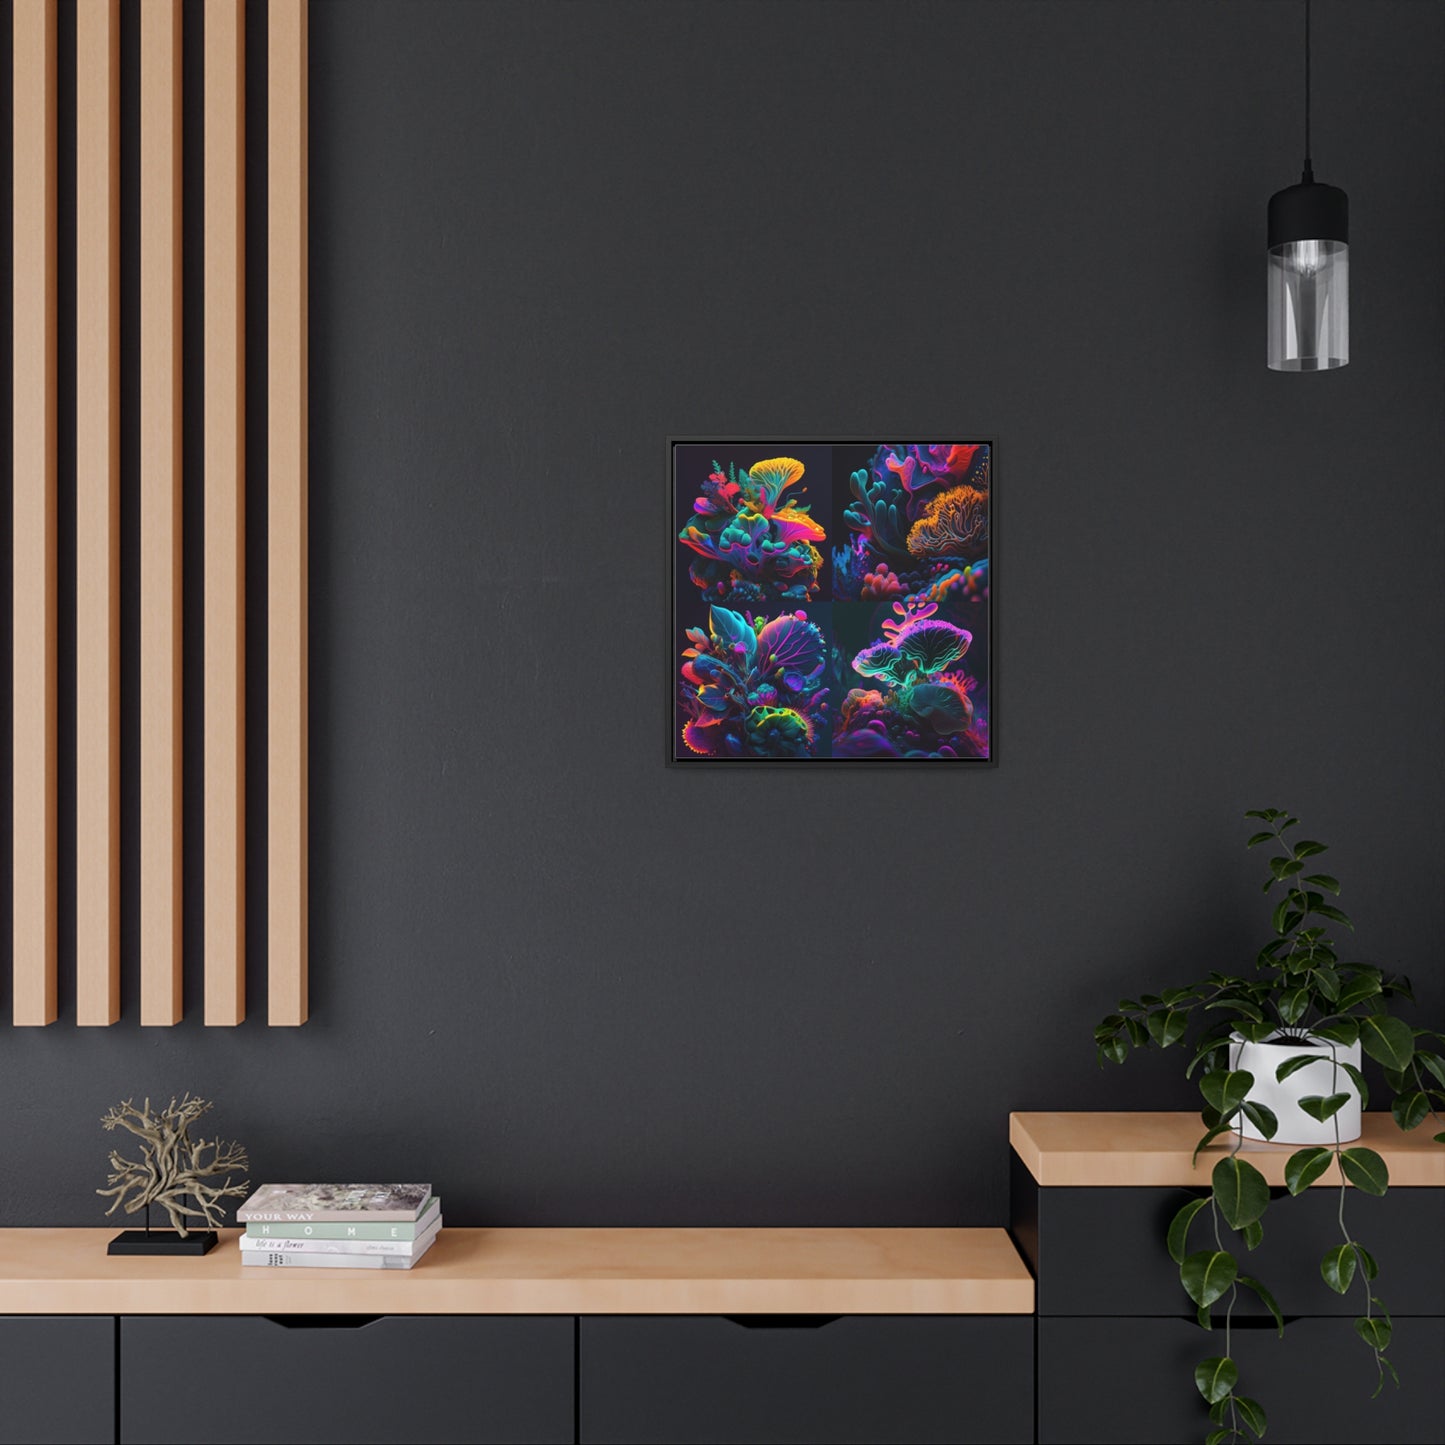 Gallery Canvas Wraps, Square Frame Macro Coral Reef 5